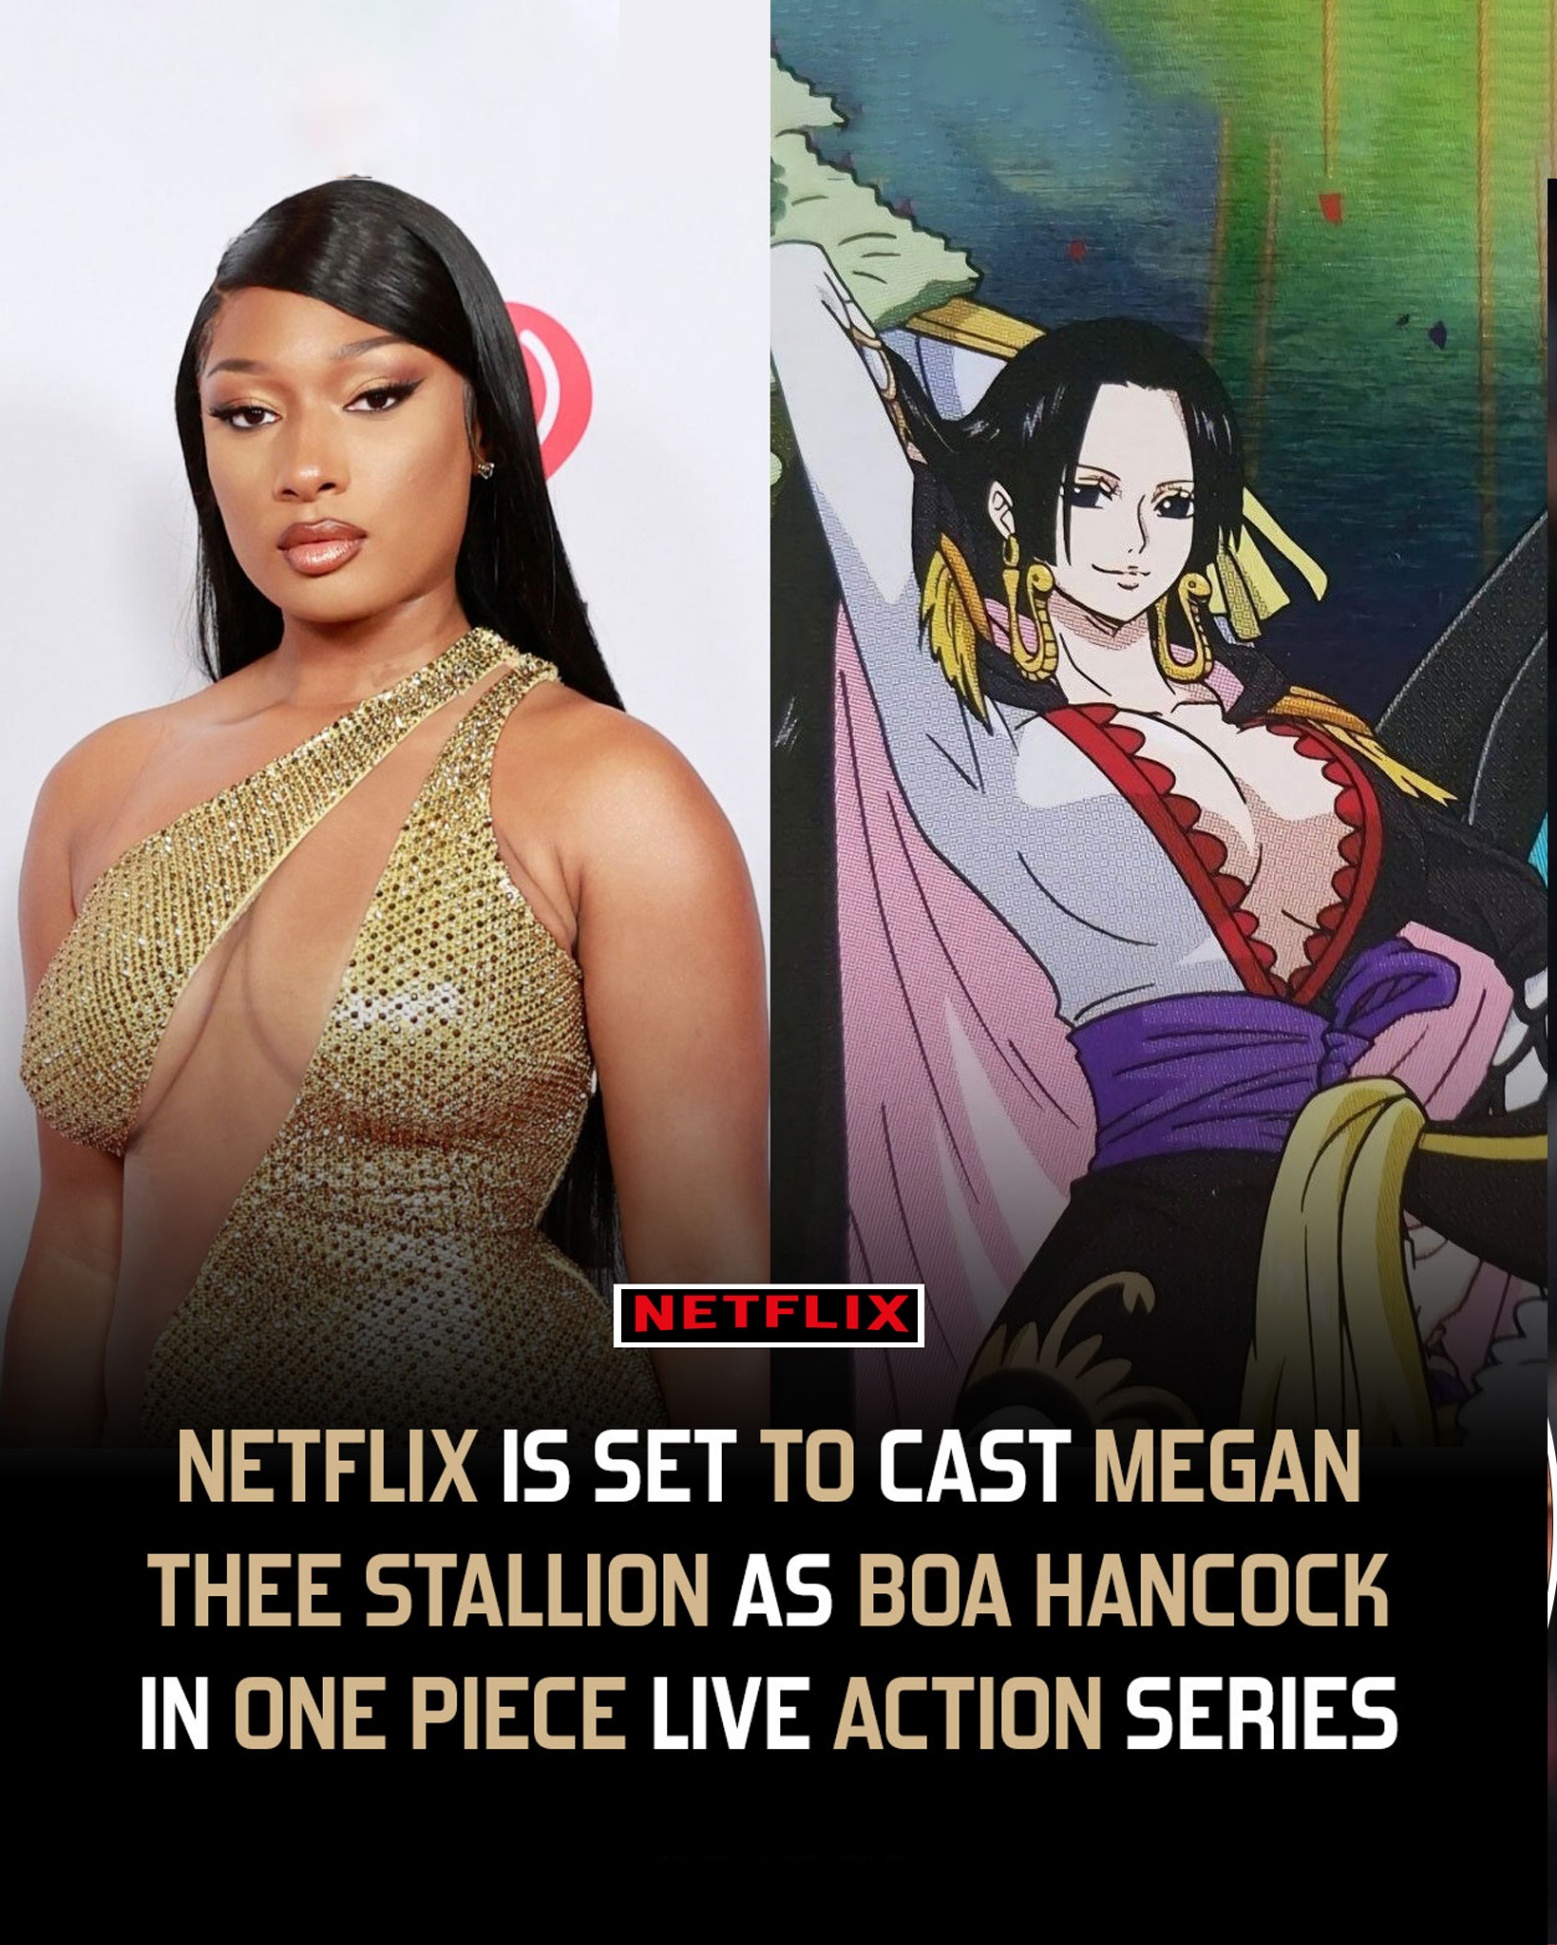 Netflix's One Piece live action series is set to cast Megan Jovan Ruth Pete, real name Megan Thee Stallion, in the role of "Snake Princess" Boa Hancock.